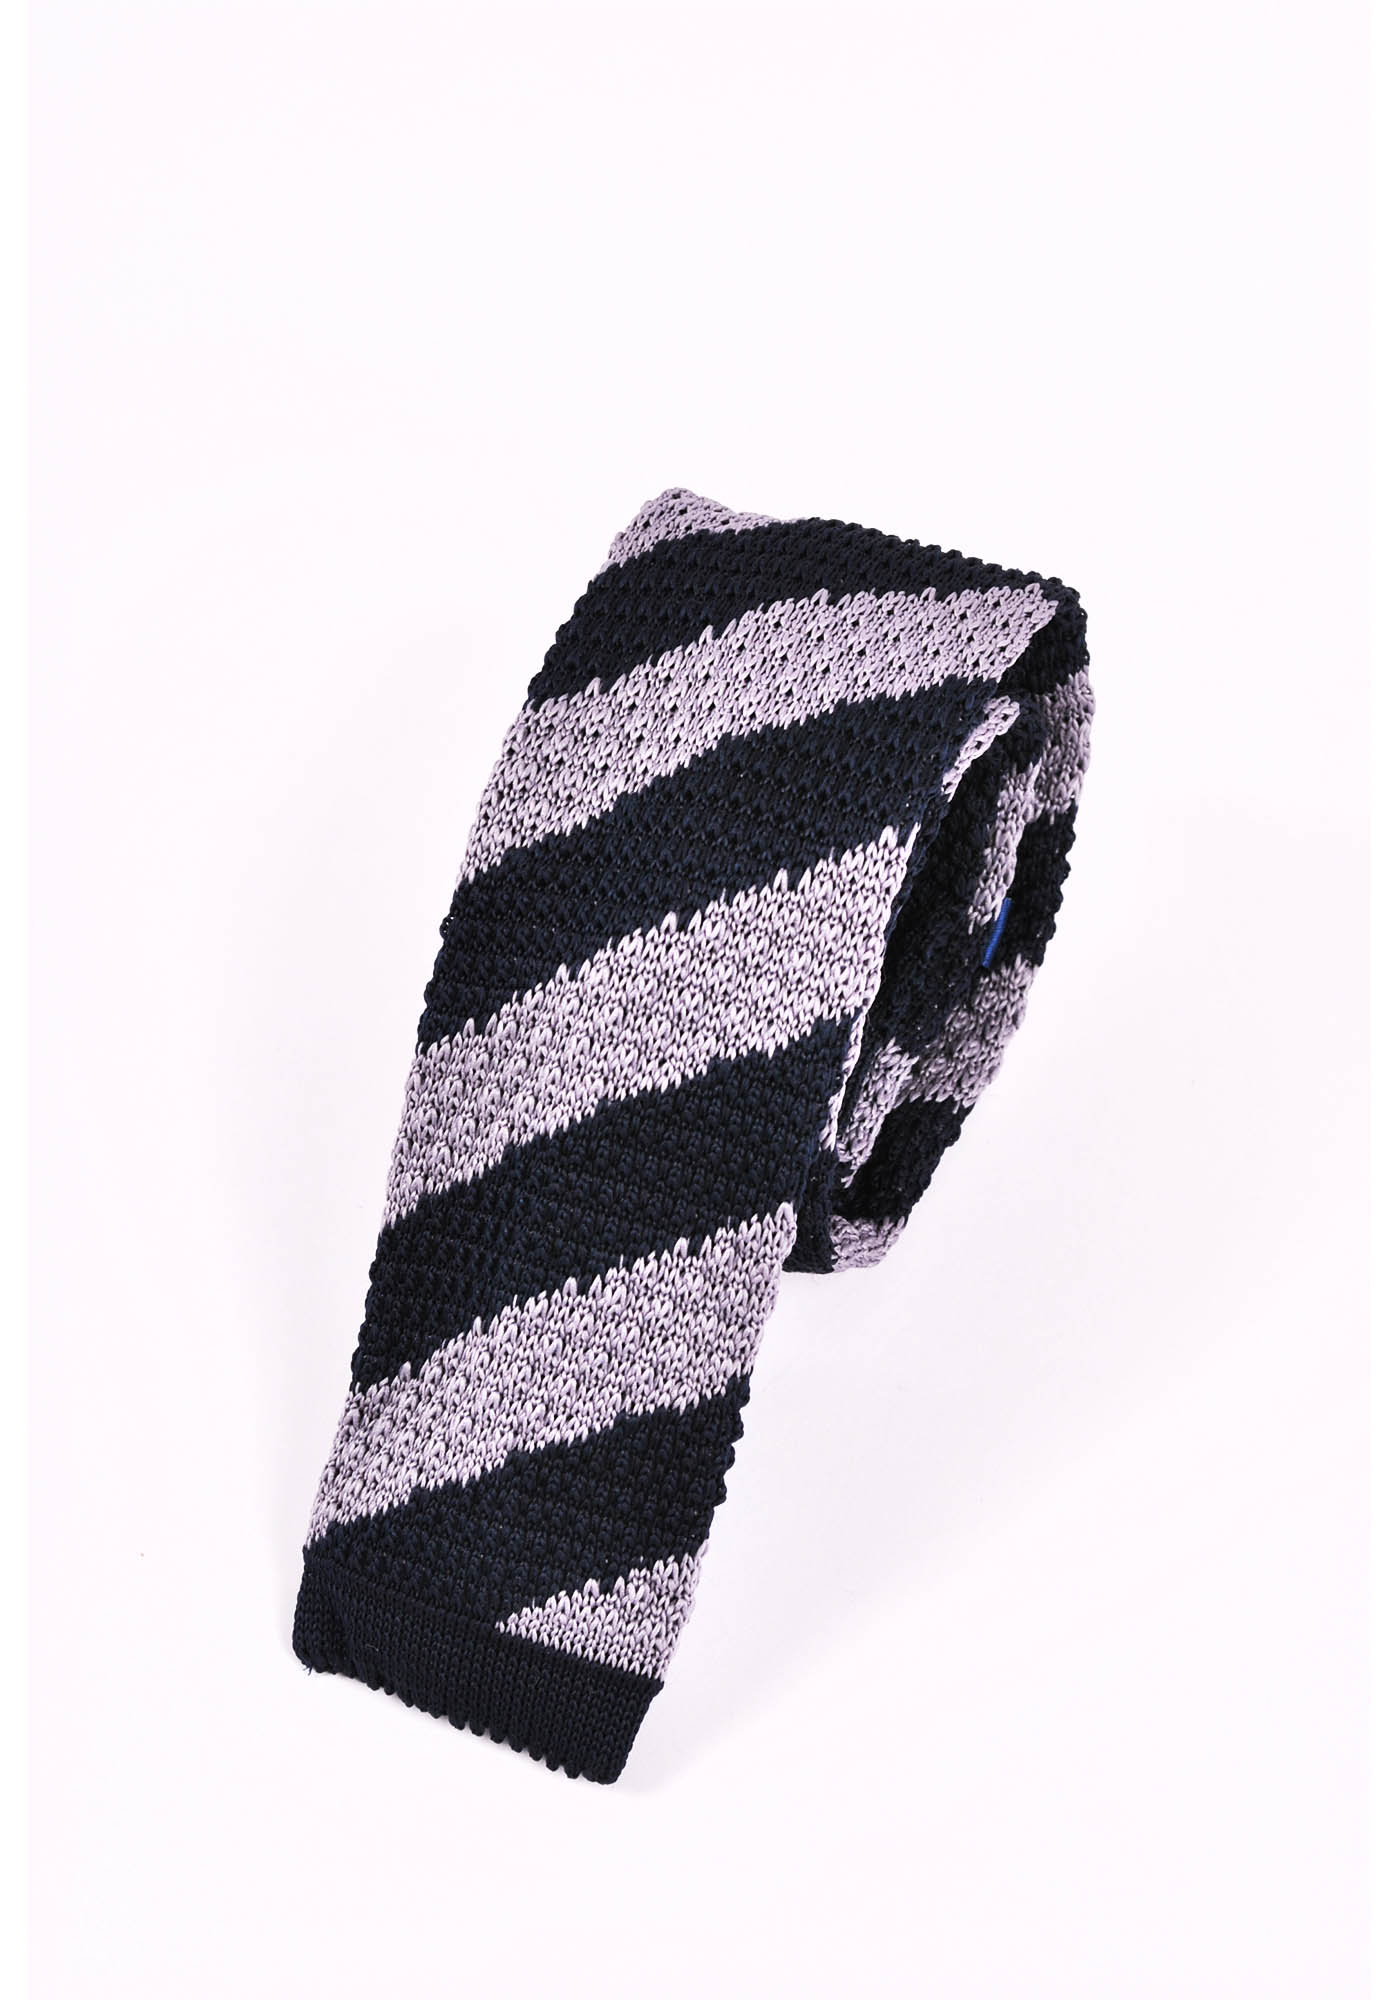 Italian-made straight-cut tie in knitted cotton piqué - Black/Grey